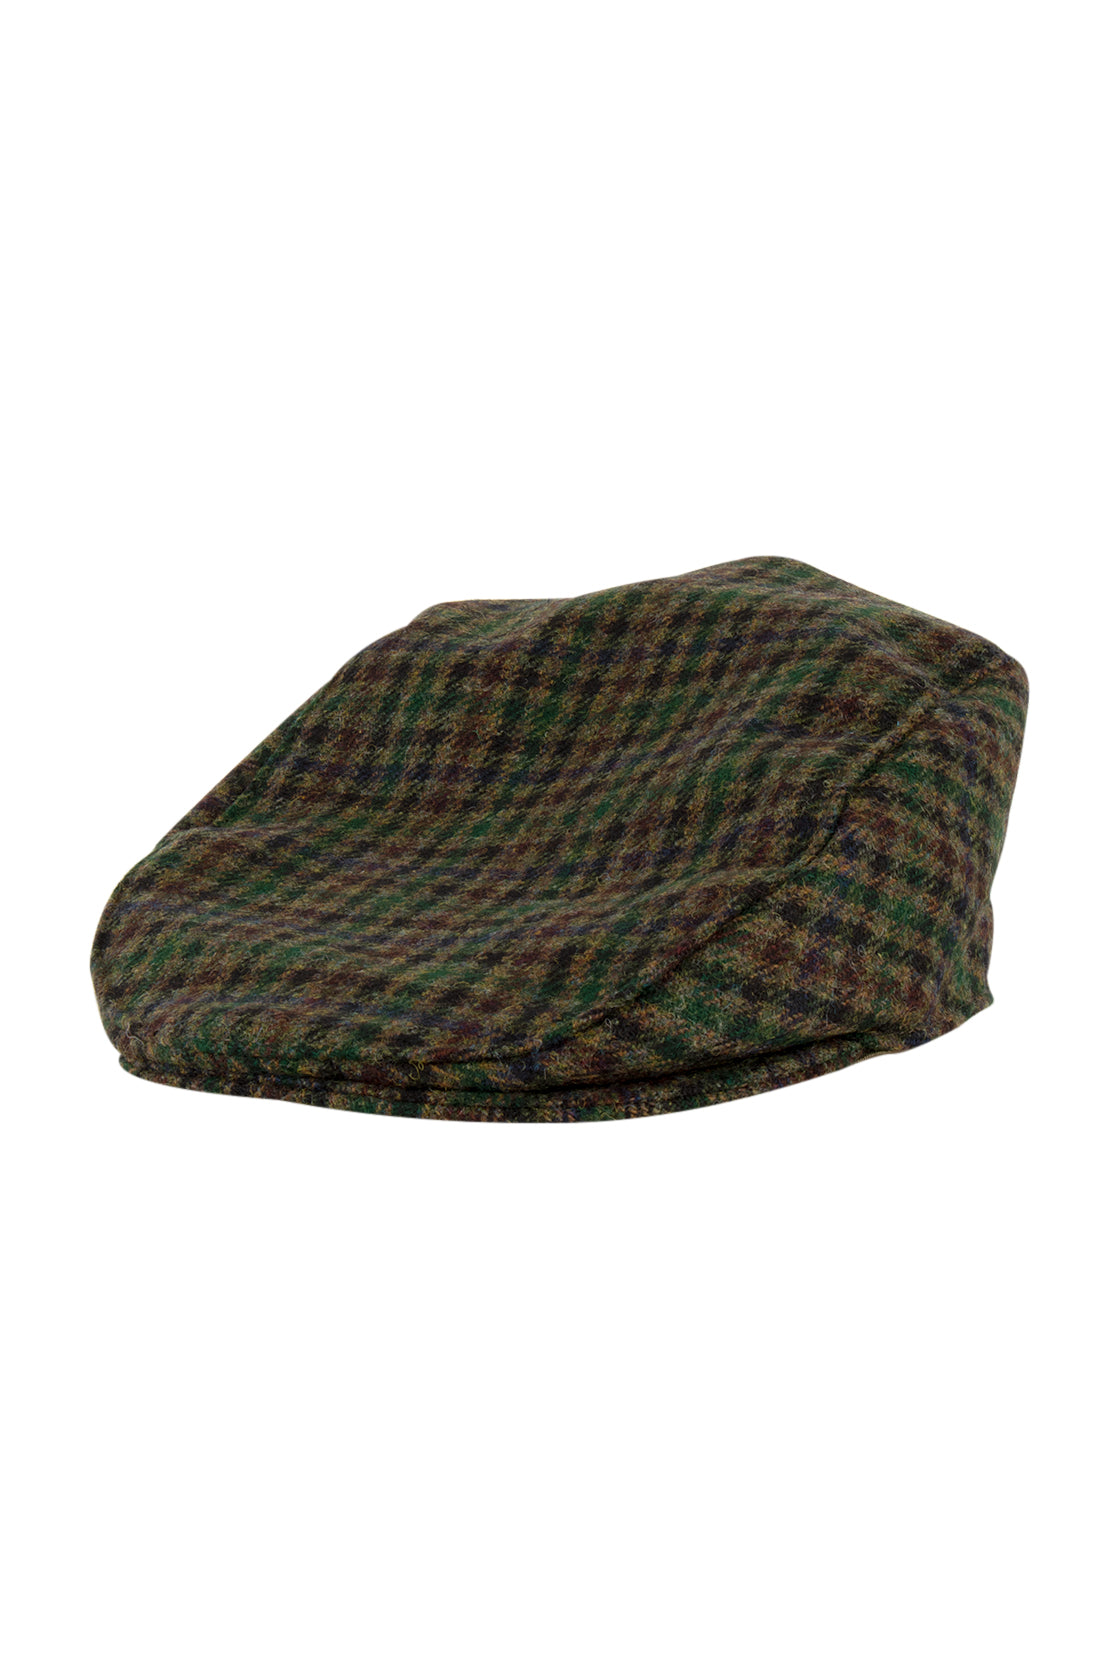 Dents Shearwater Dogtooth Flat Cap Forest